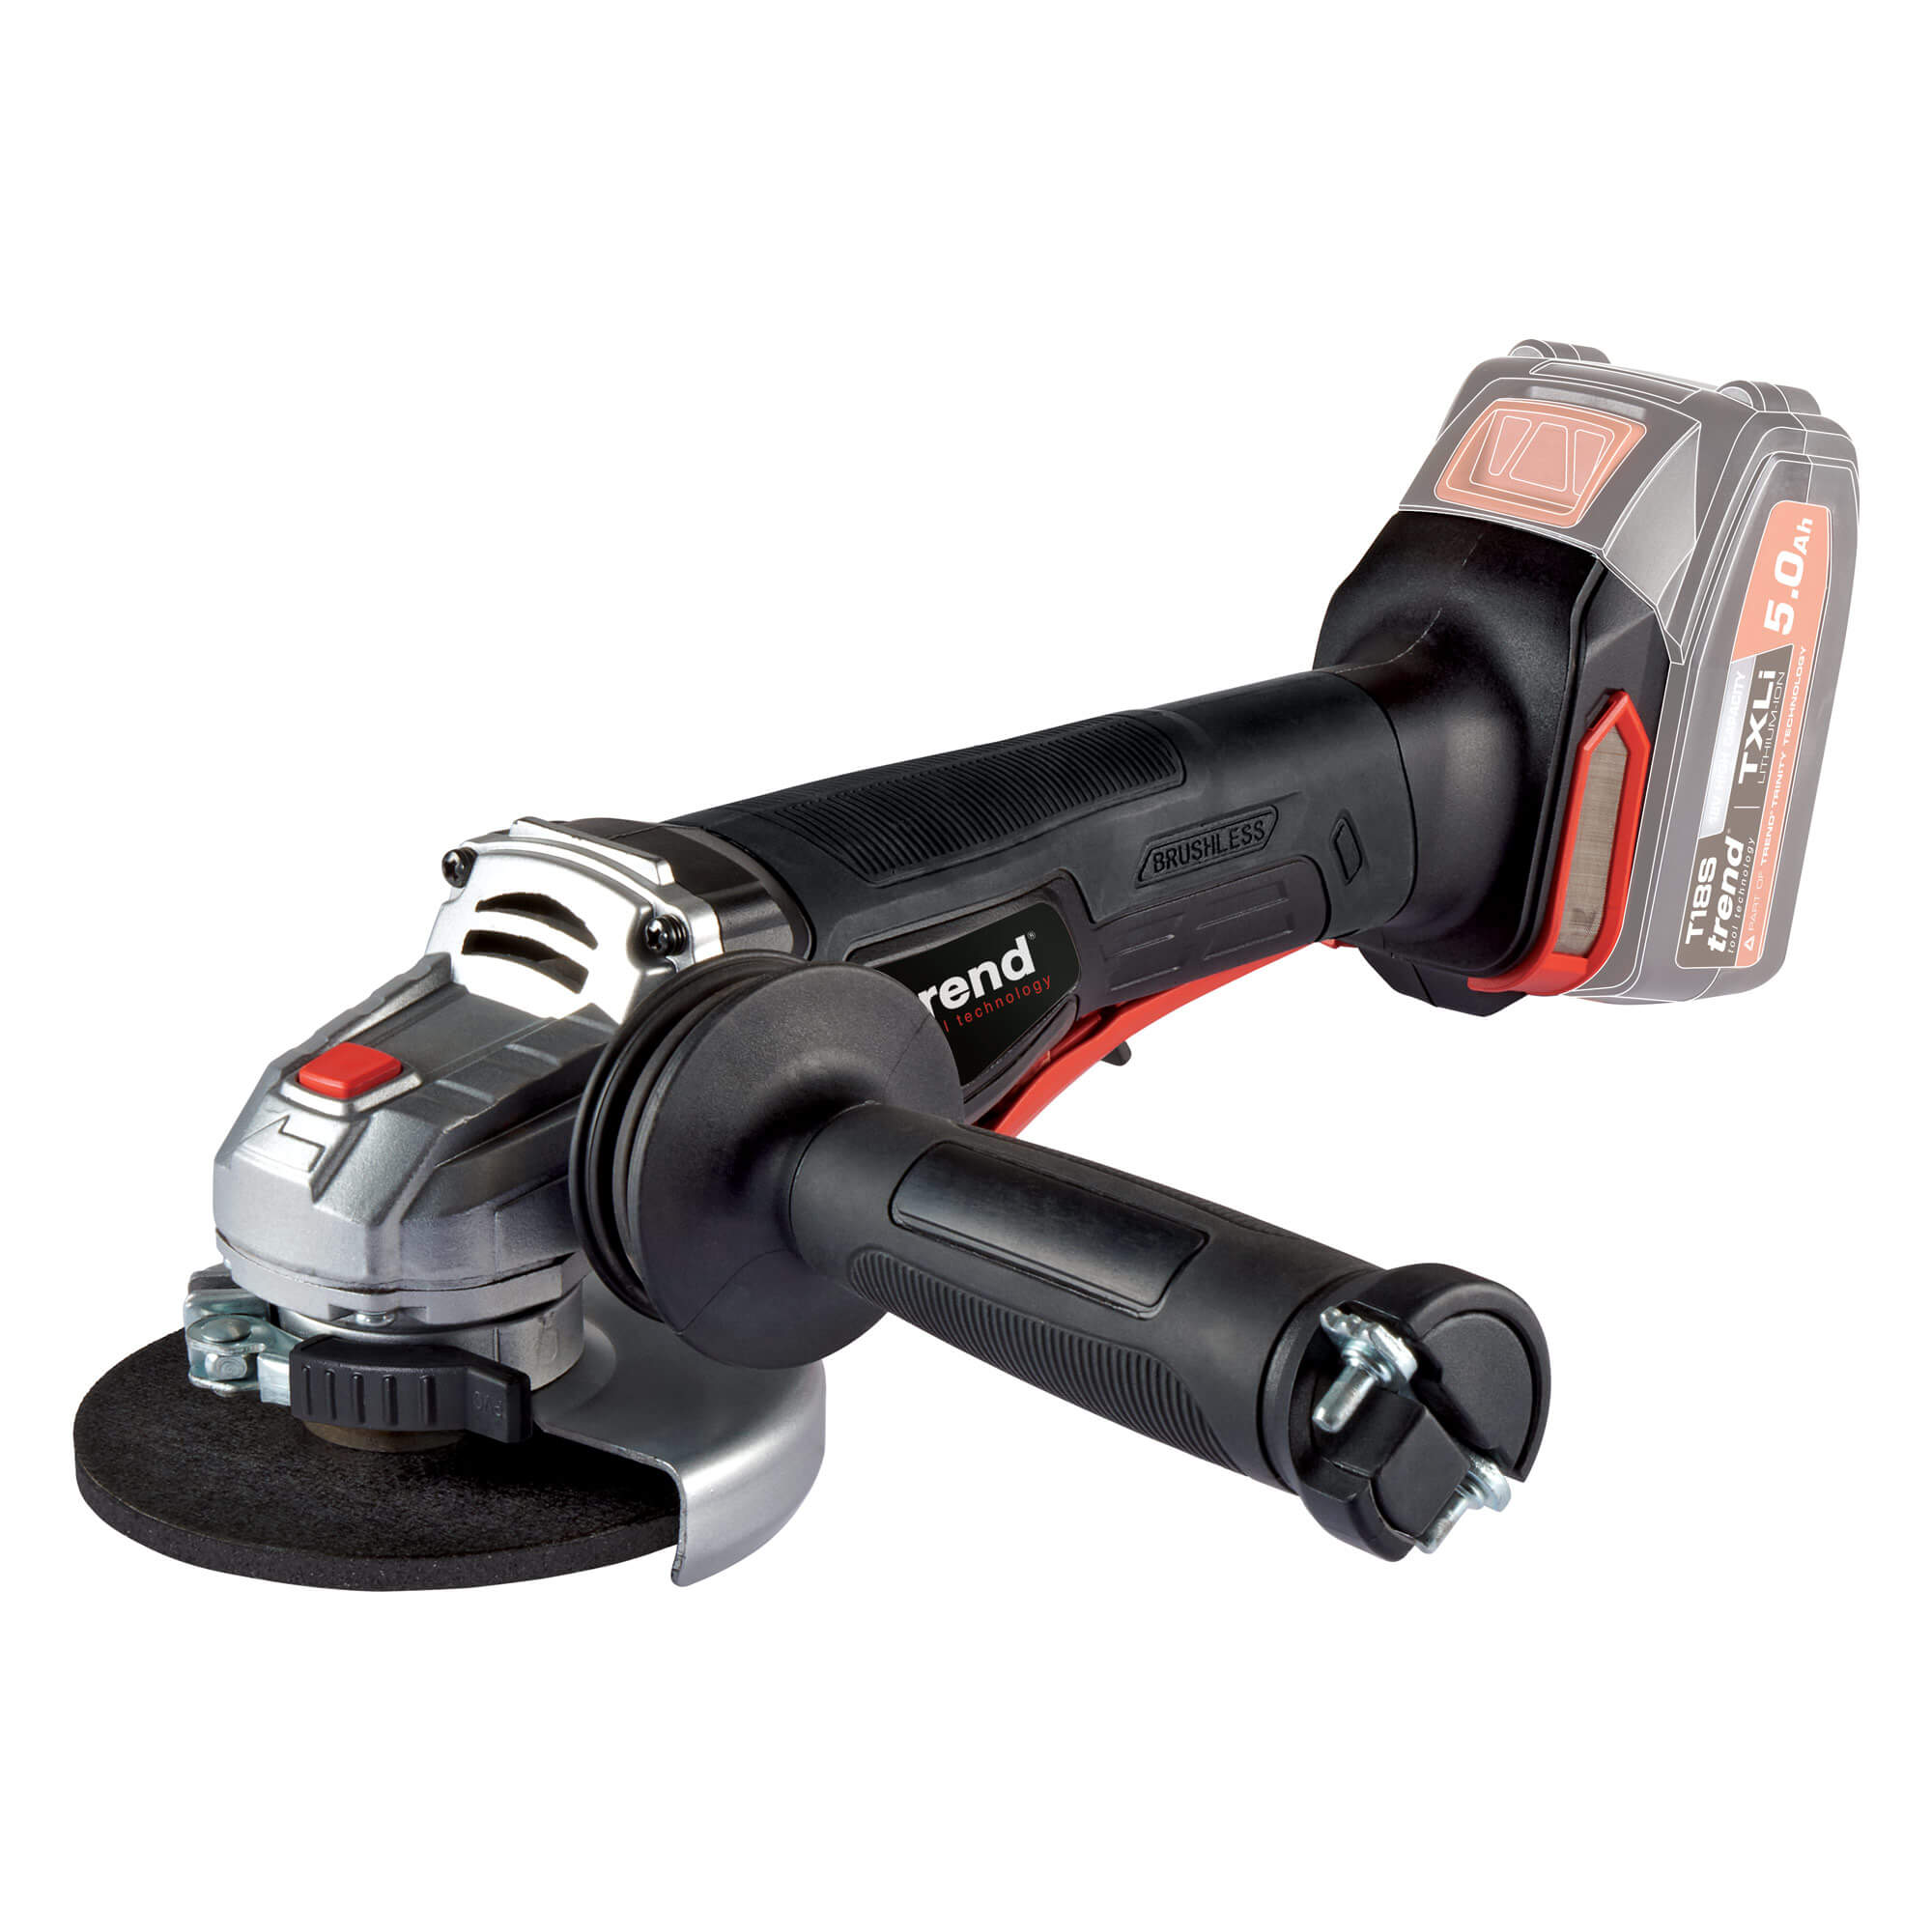 Image of Trend T18S/AG115 18v Cordless Brushless Angle Grinder 115mm No Batteries No Charger No Case